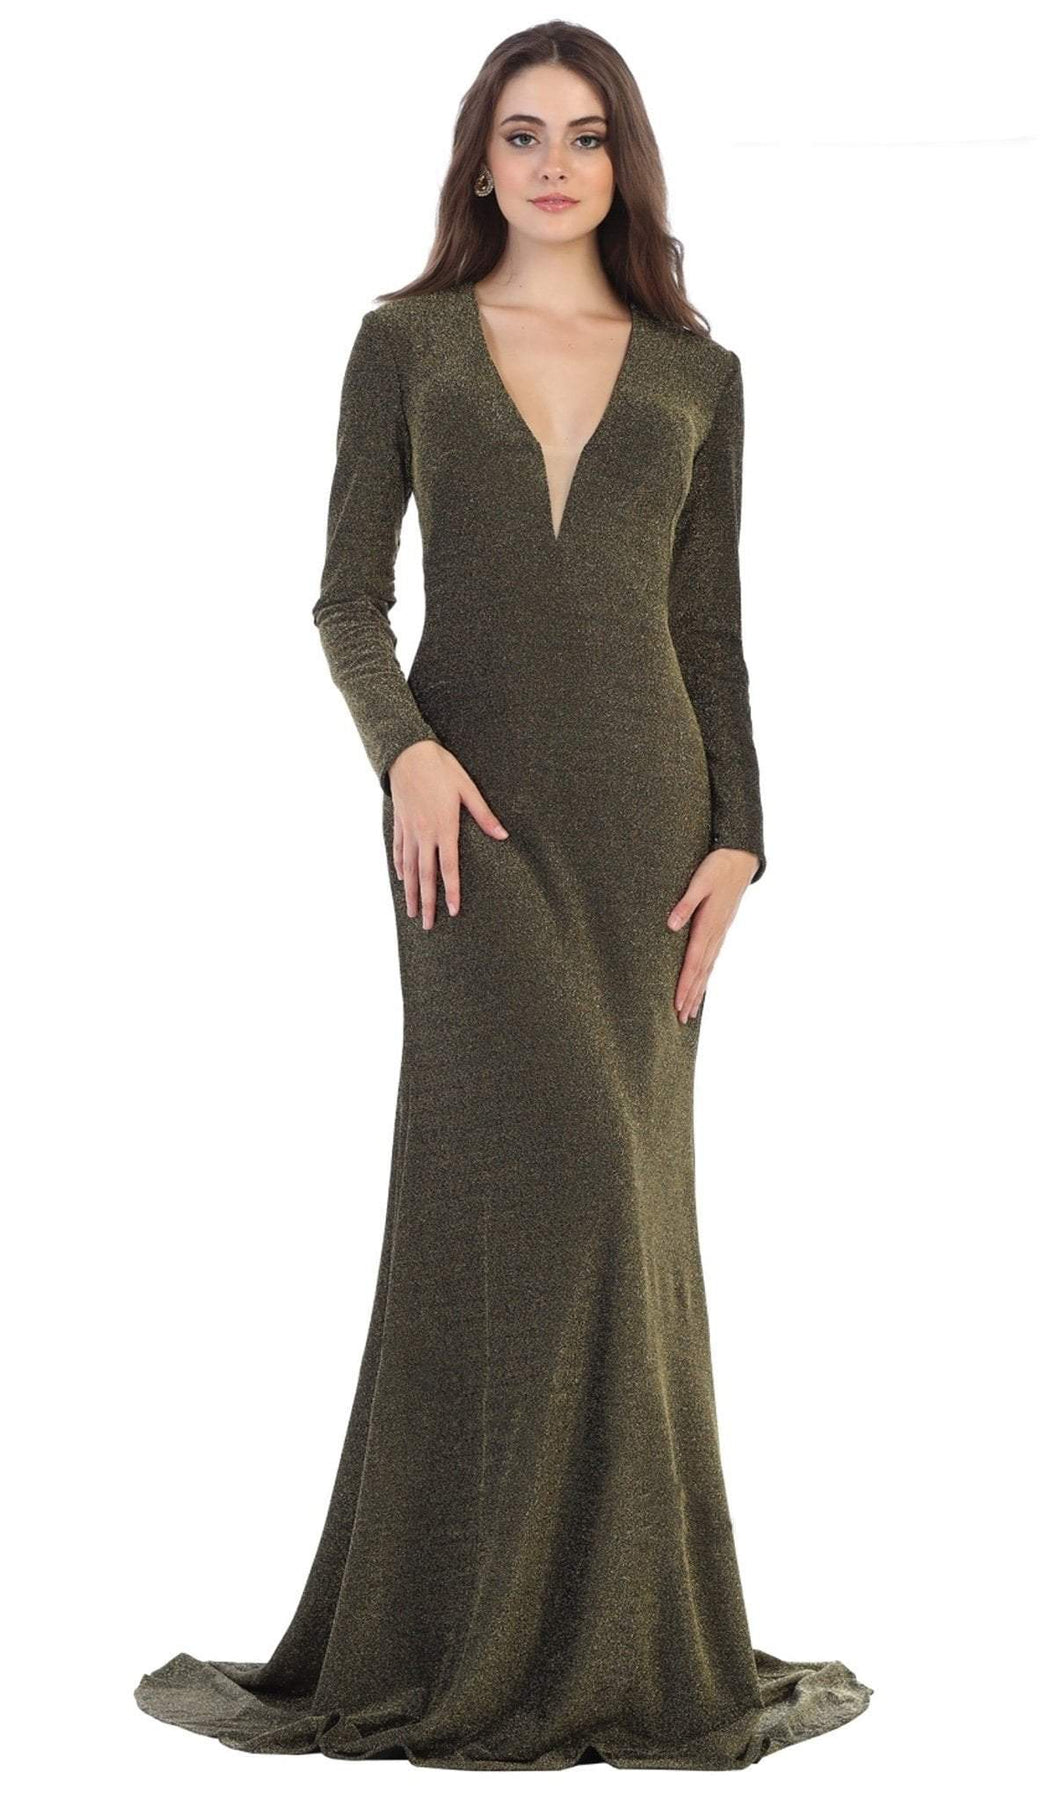 May Queen - MQ1583 Long Sleeve Deep V-neck Trumpet Dress Special Occasion Dress 4 / Olive